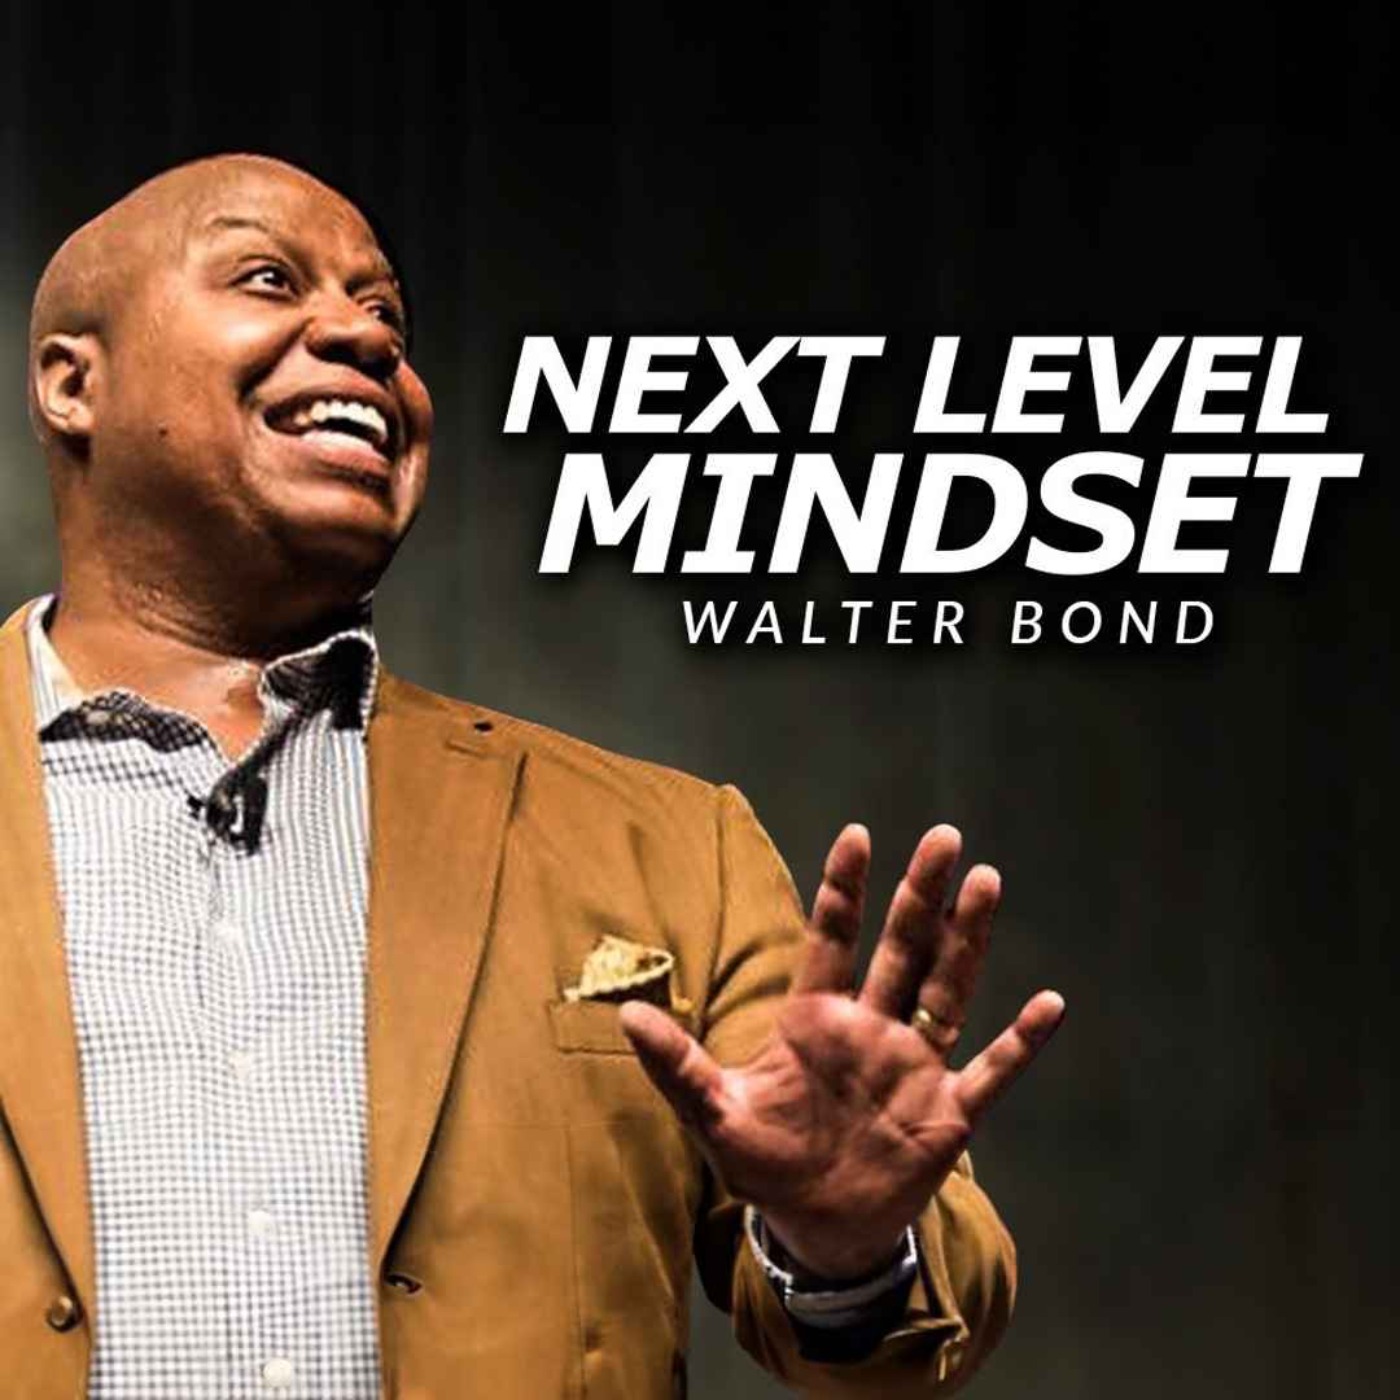 UNLEASH THE NEXT LEVEL MINDSET - One of the Best Motivational Speeches Ever by Walter Bond